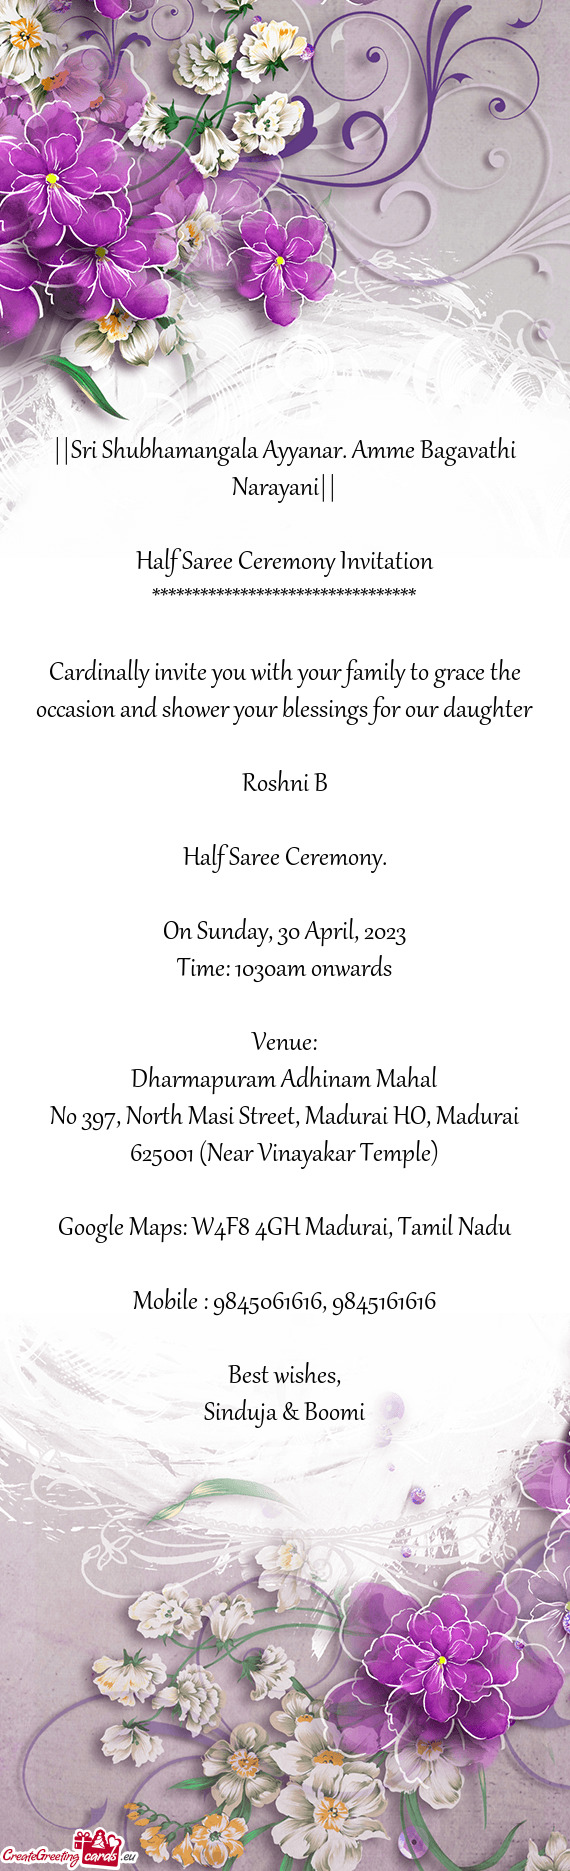 Cardinally invite you with your family to grace the occasion and shower your blessings for our daugh